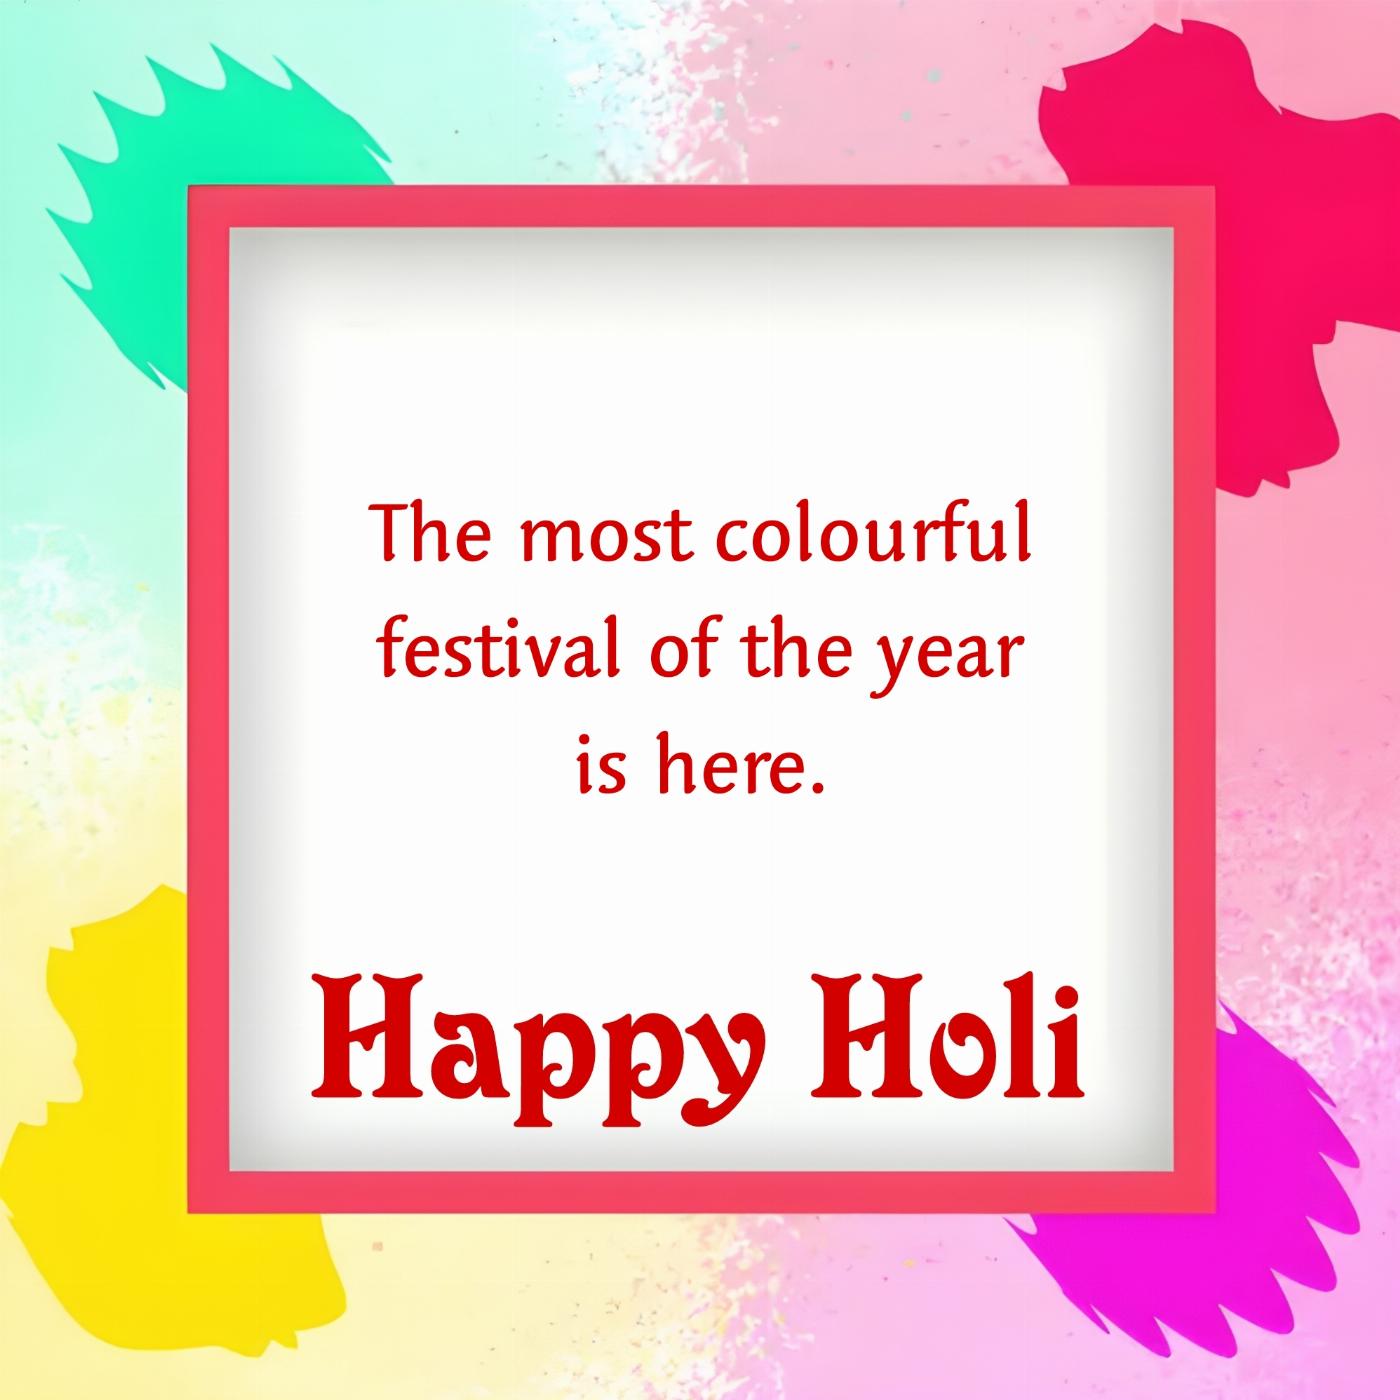 The most colourful festival of the year is here